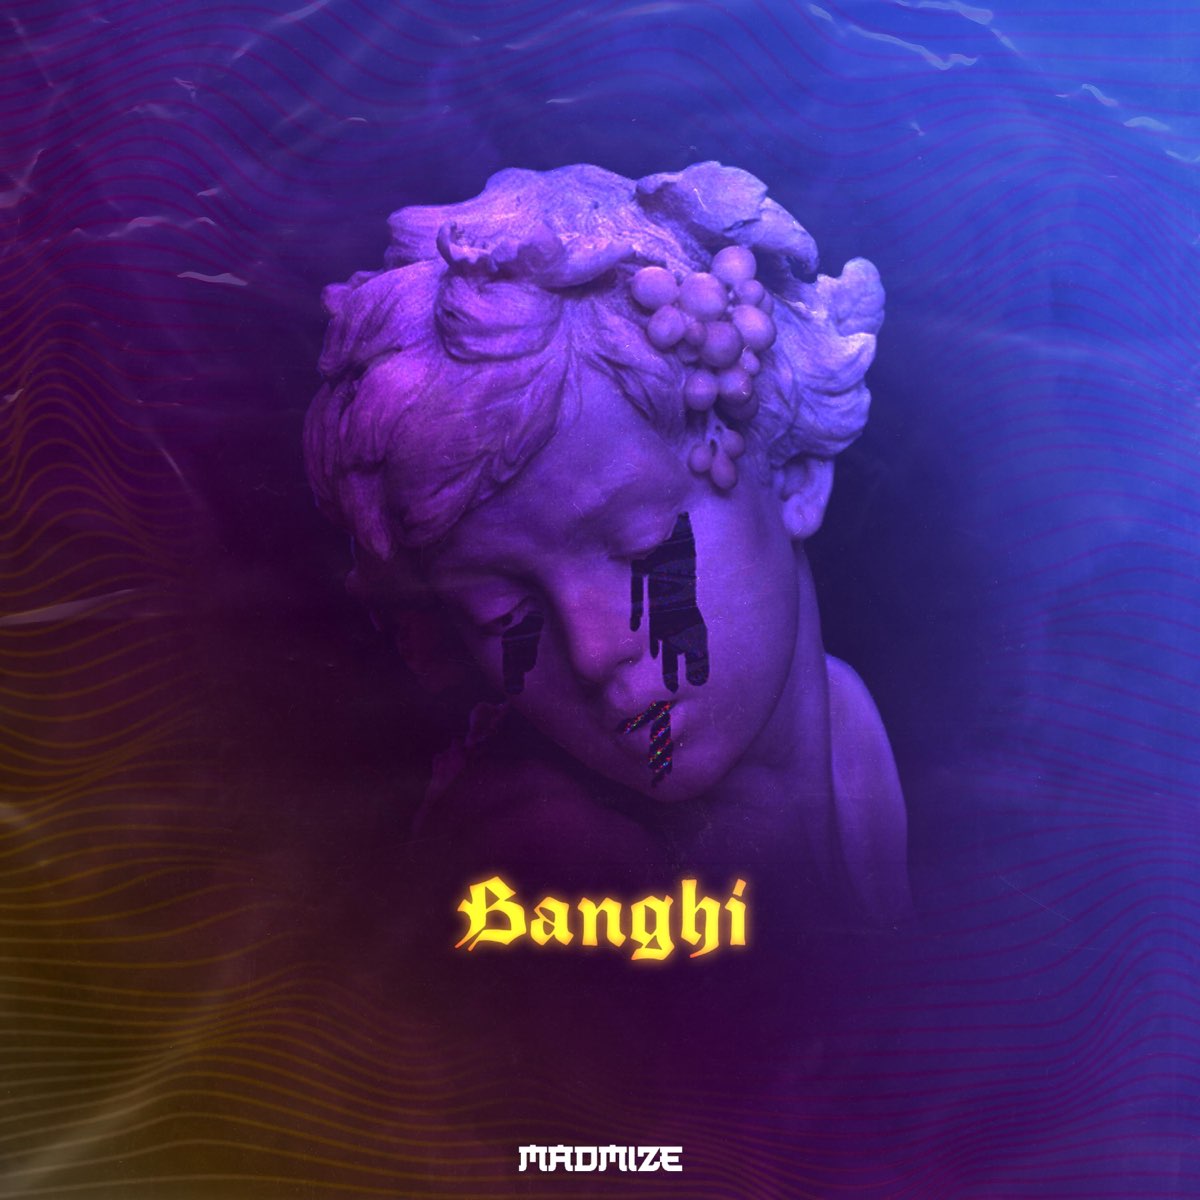 Banghi - Single by Madmize on Apple Music